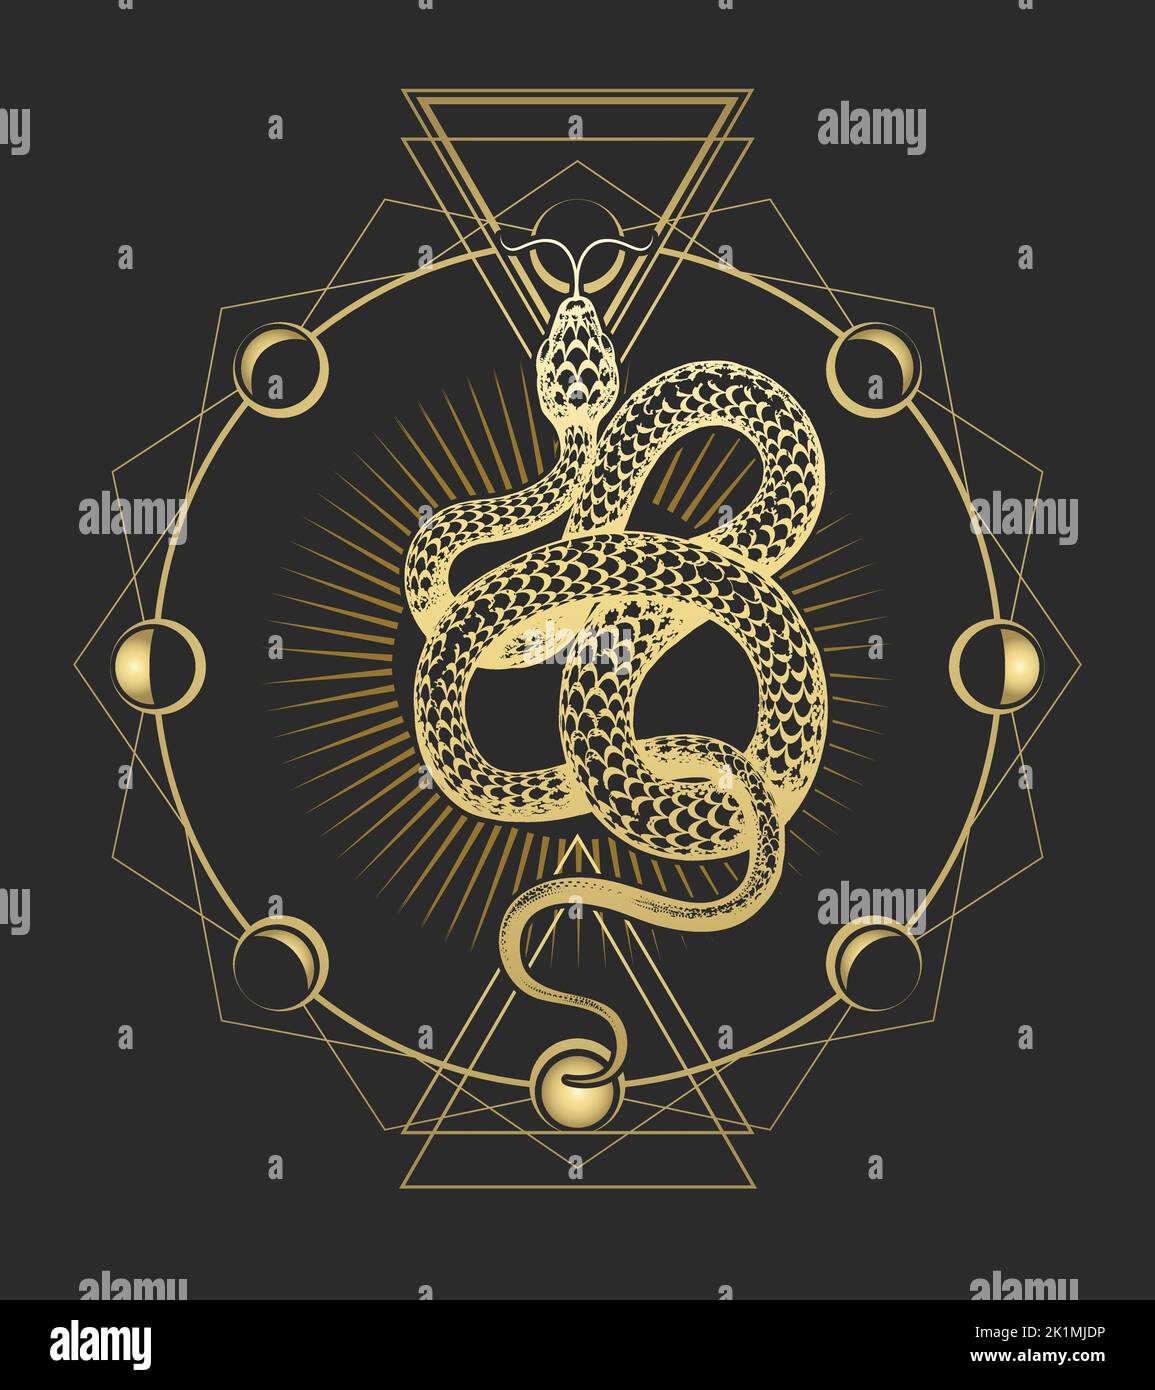 Esoteric Emblem of Snake Sacred Geometry. Vector Illustration isolated on Black Stock Vector